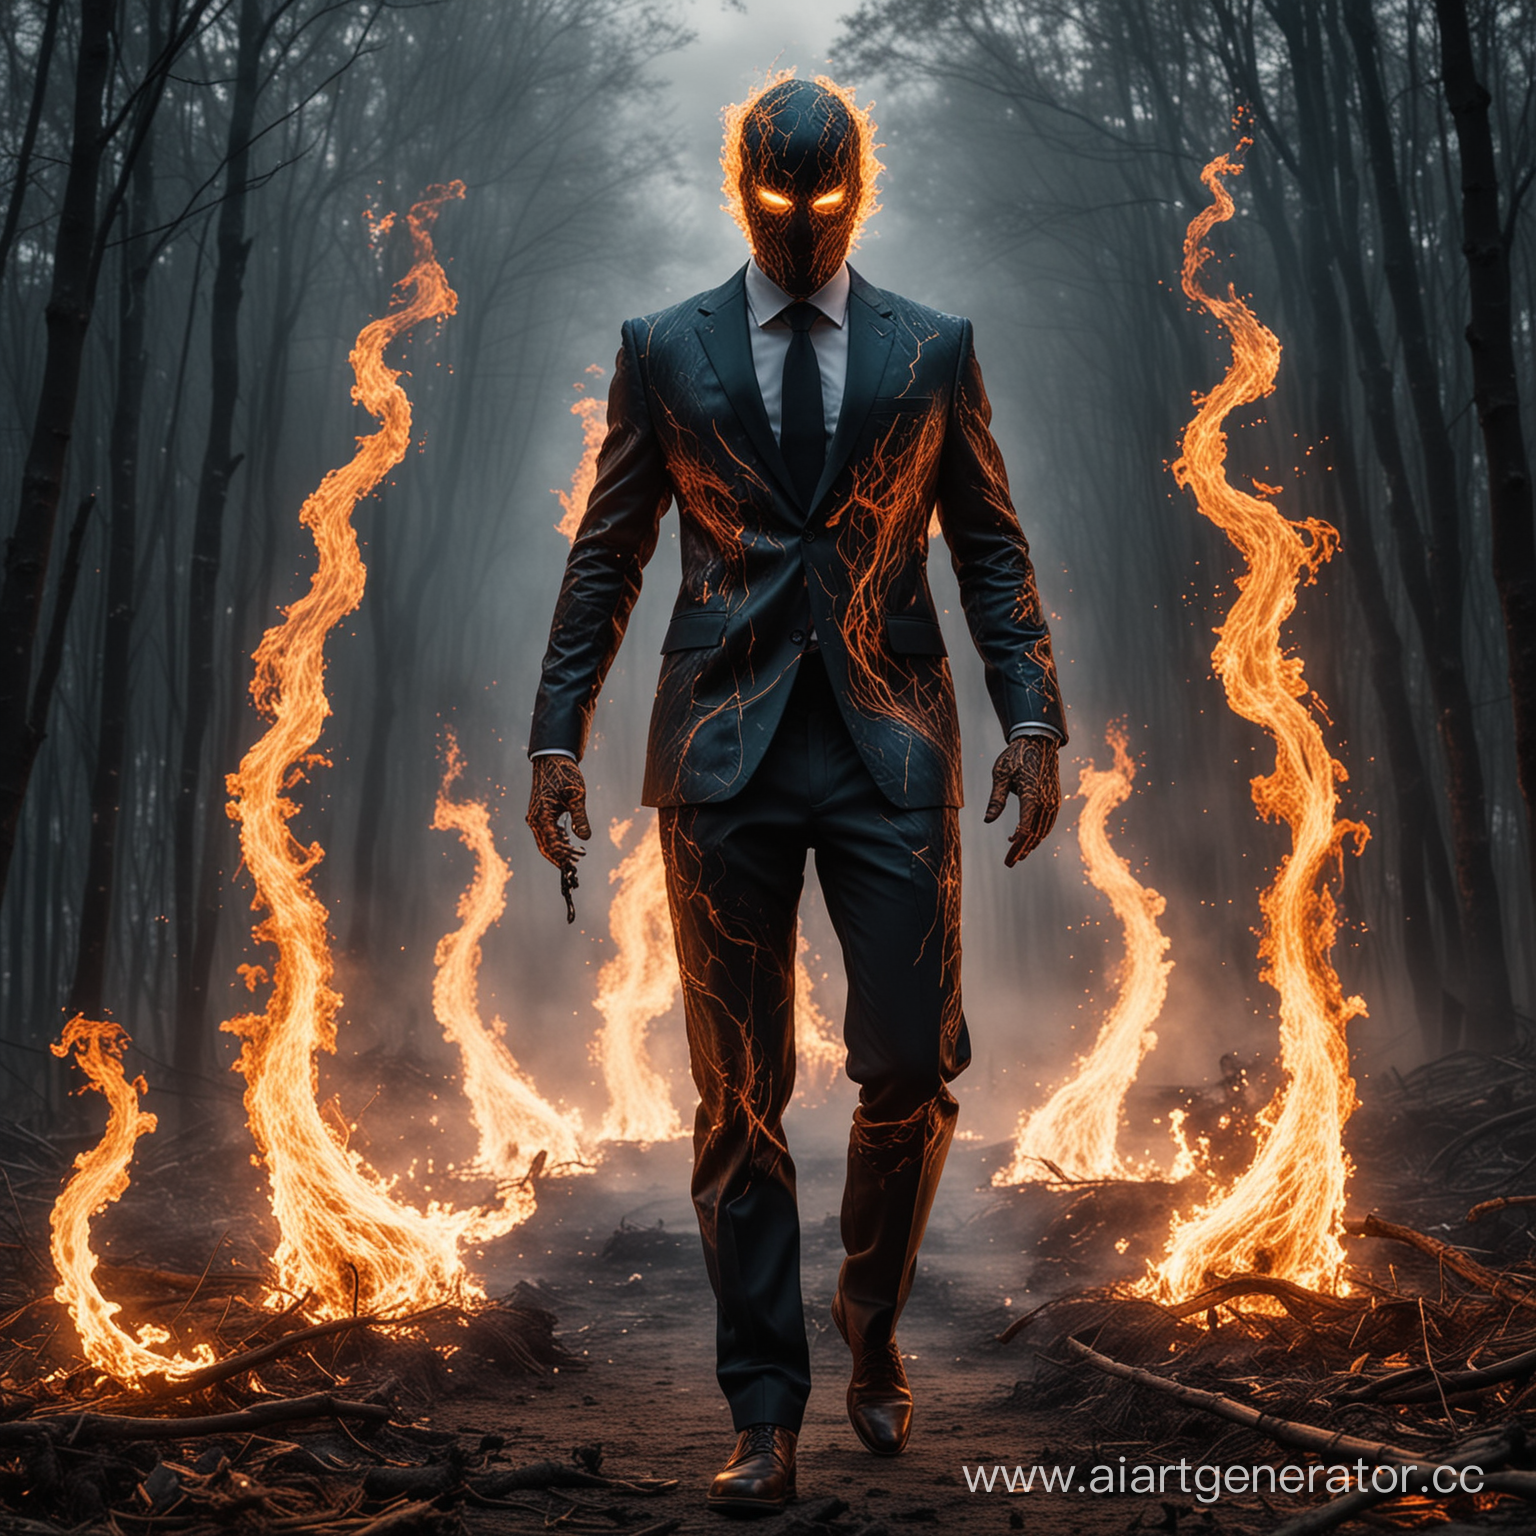 Bio-Blaze: Possesses control over bioenergy, wearing a suit adorned with pulsating veins of energy, emitting flames that dance along the surface. Make it cinematic image 